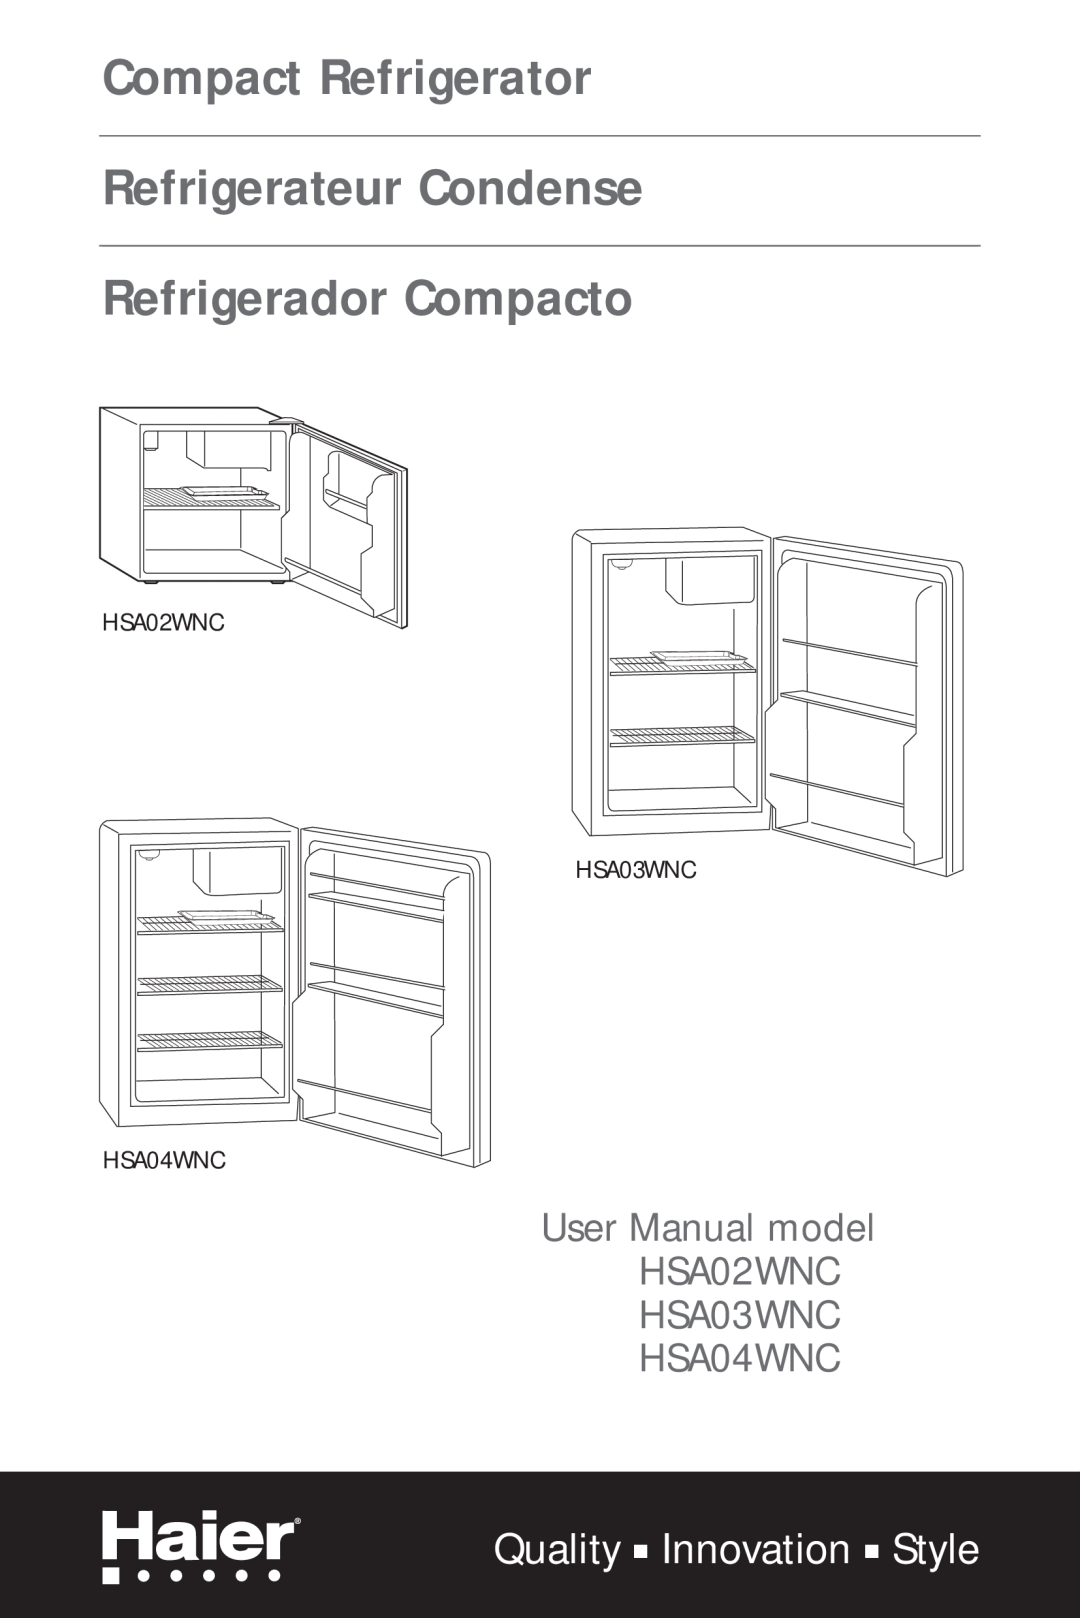 Haier HSA02WNC user manual Compact Refrigerator Refrigerateur Condense, Refrigerador Compacto, Quality Innovation Style 